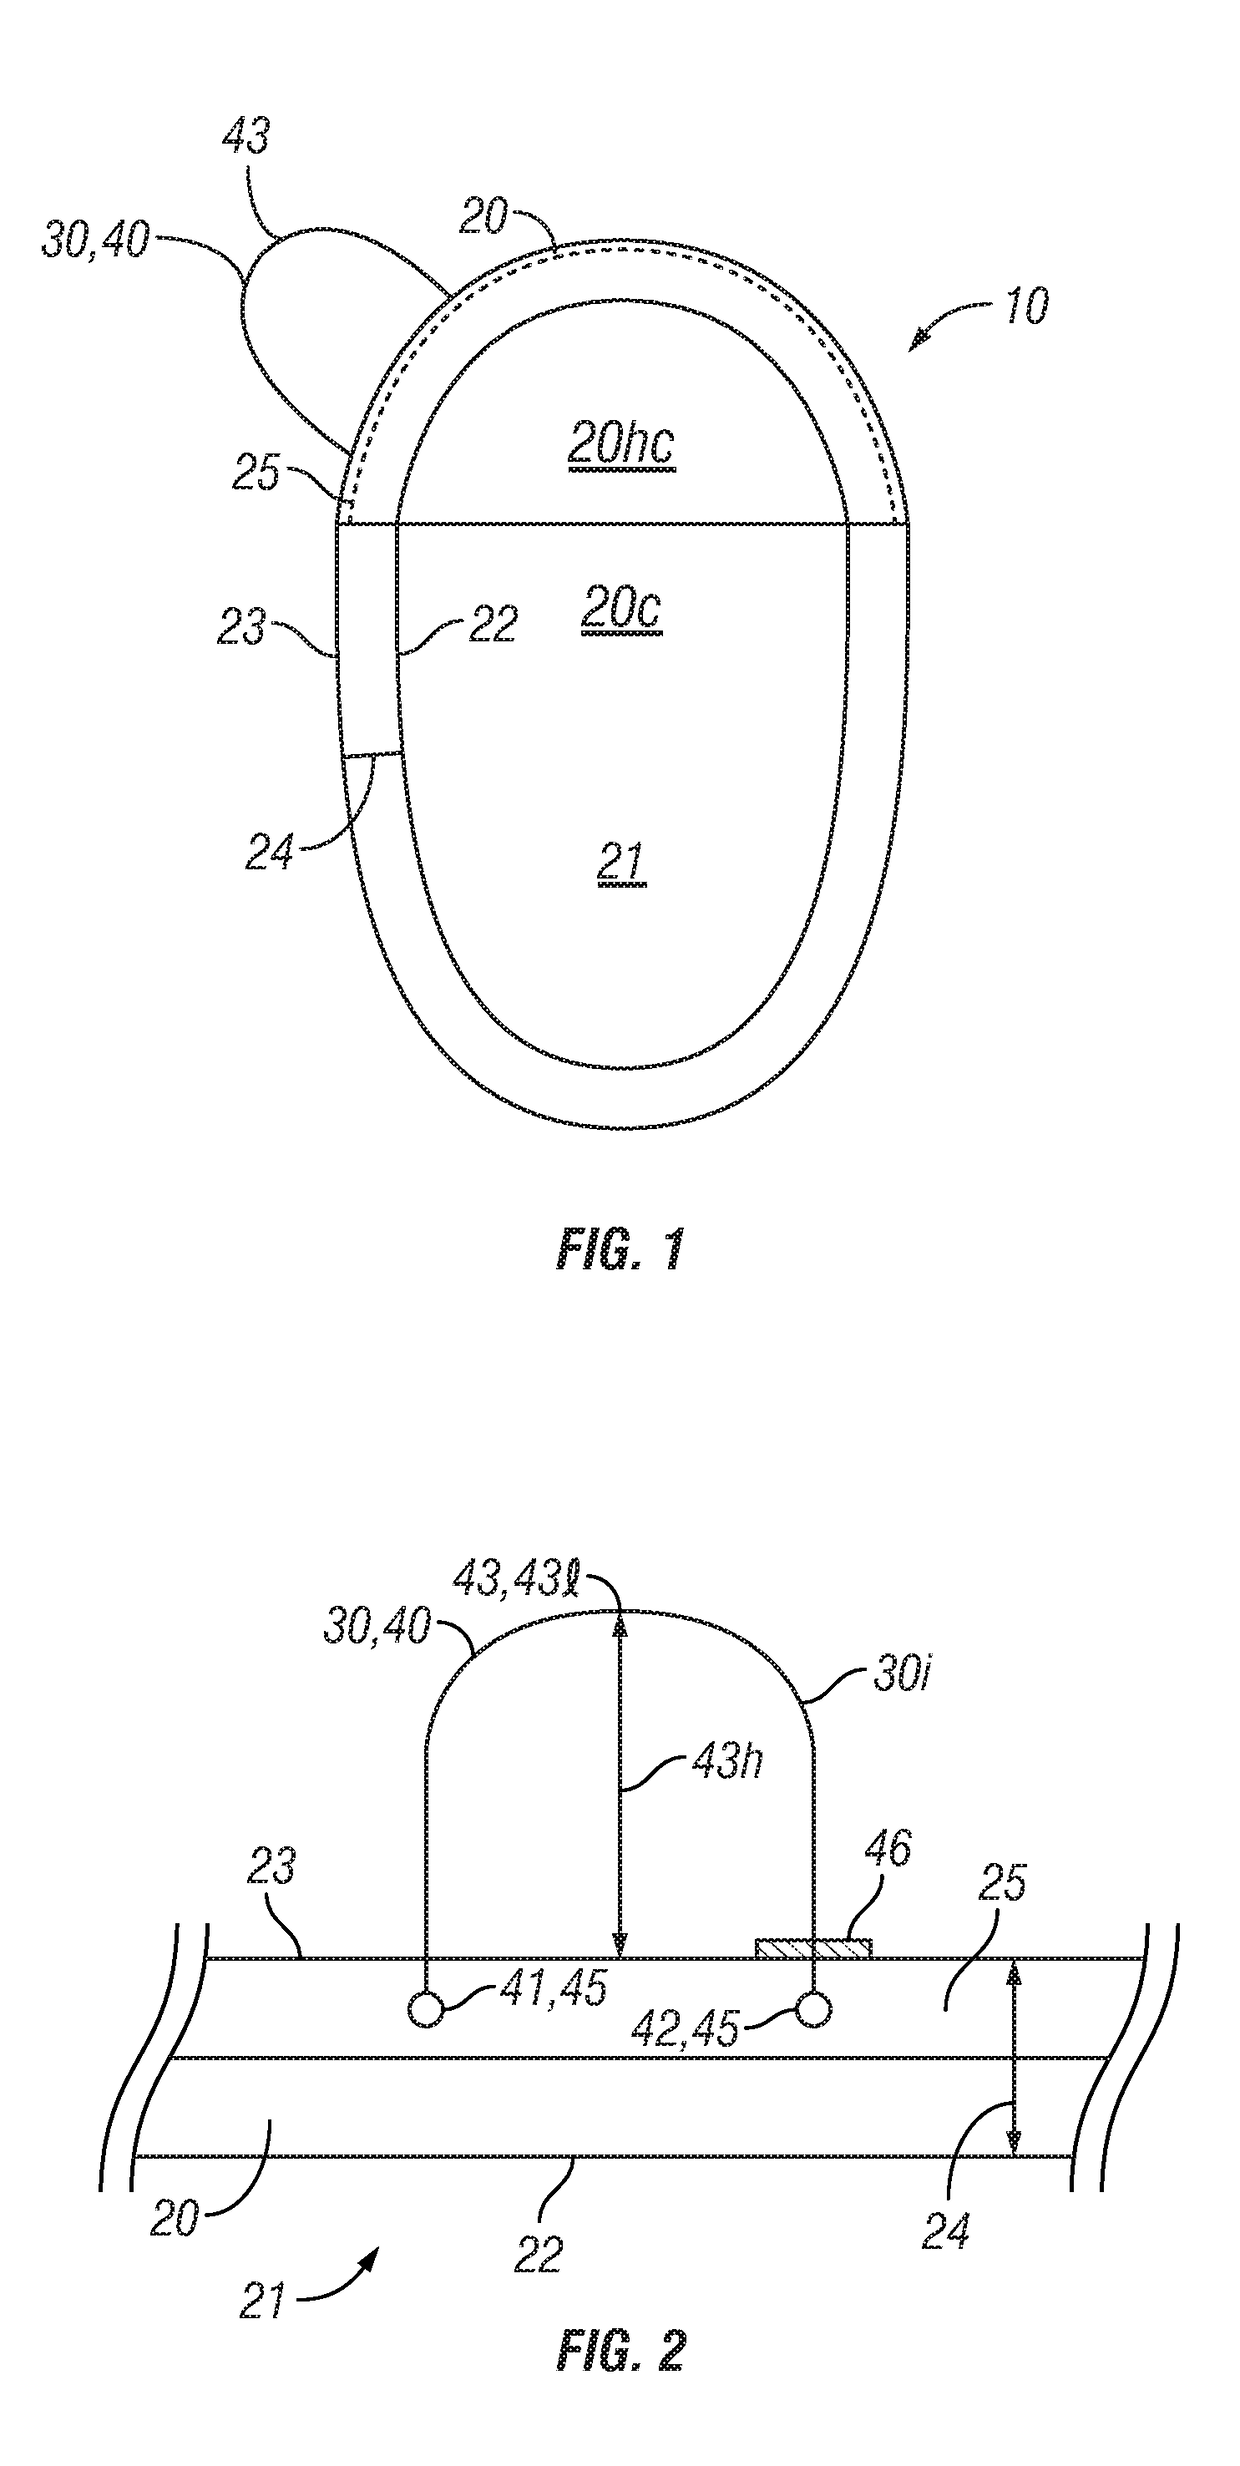 Medical implant housing having attached suture anchors